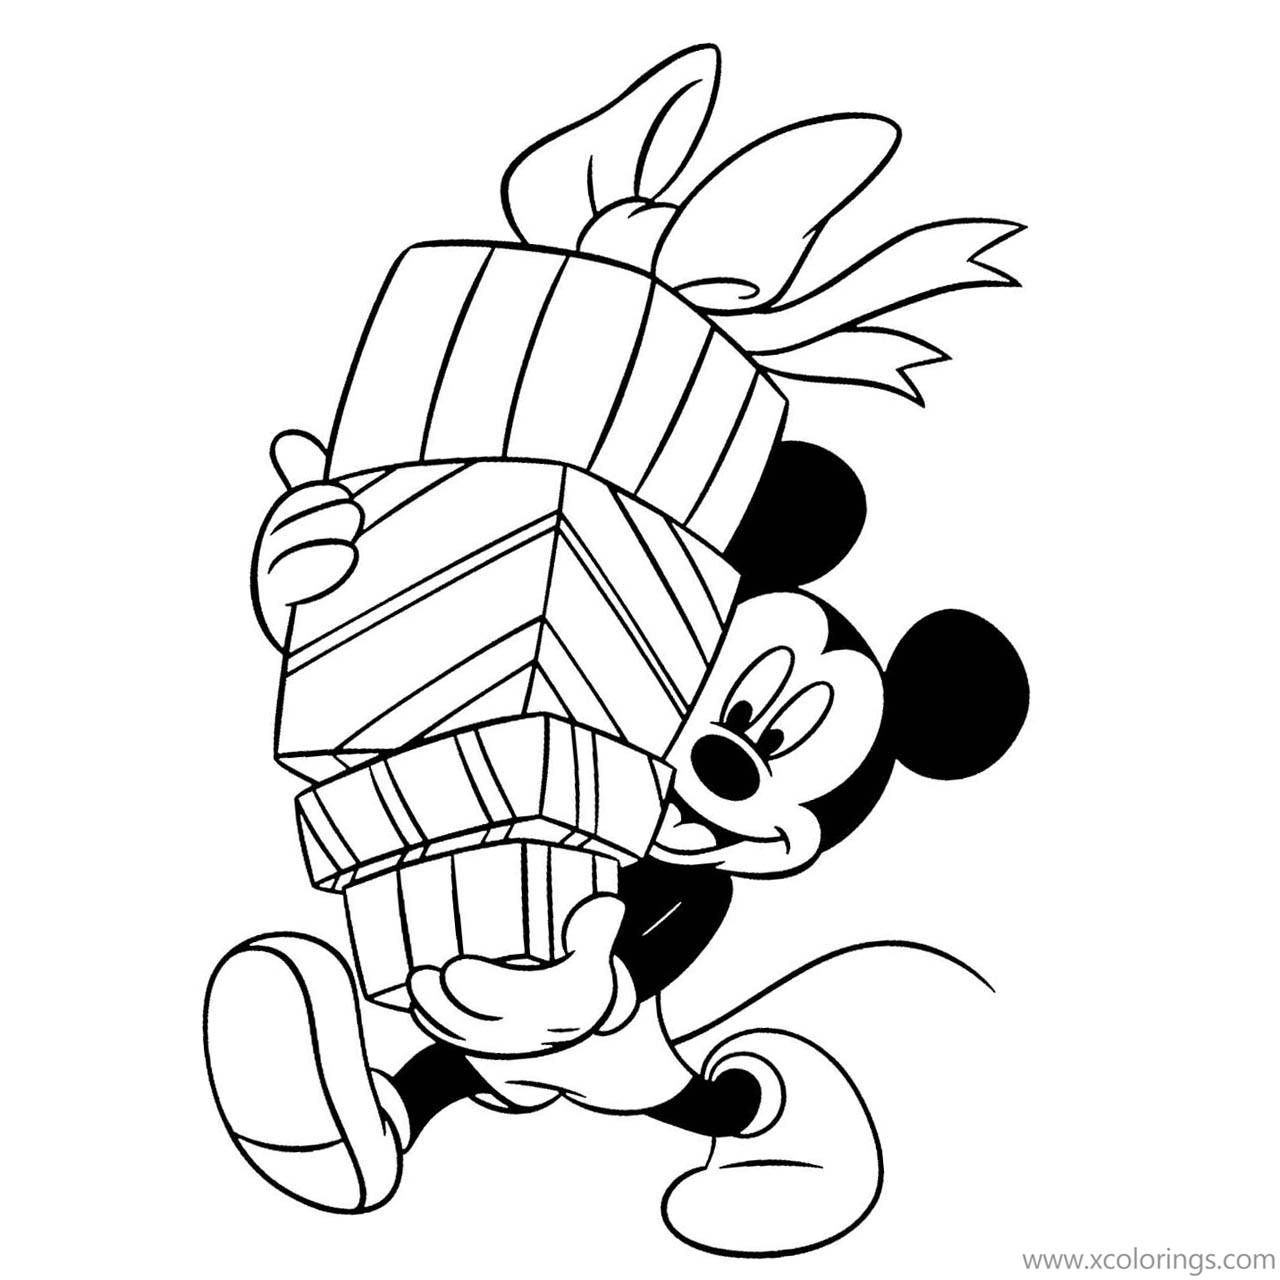 Free Mickey Mouse with Christmas Presents Coloring Pages printable